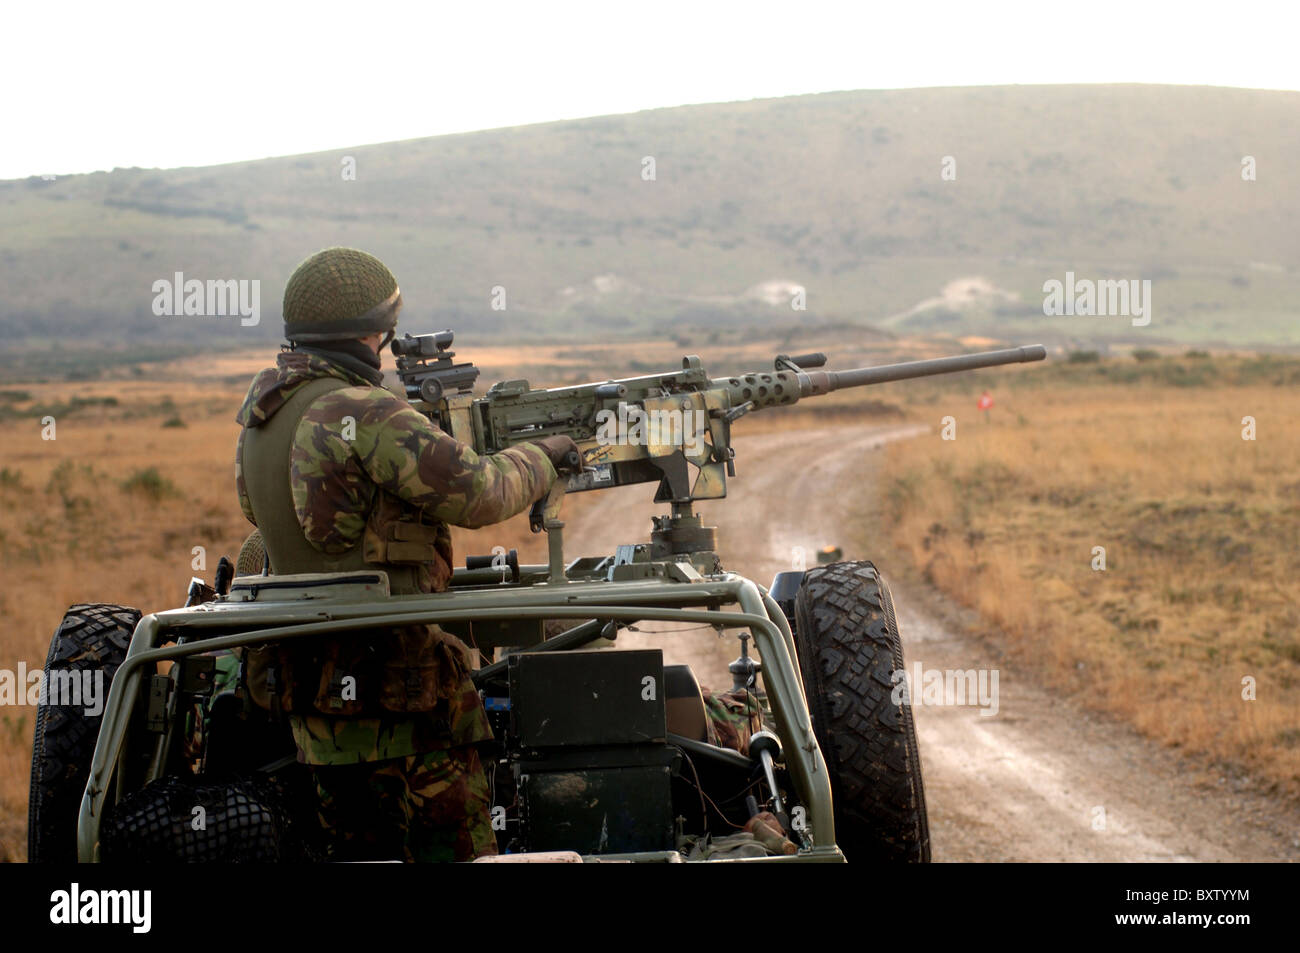 A member of the Pathfinder Platoon fires a heavy machine gun atop a Land Rover. Stock Photo